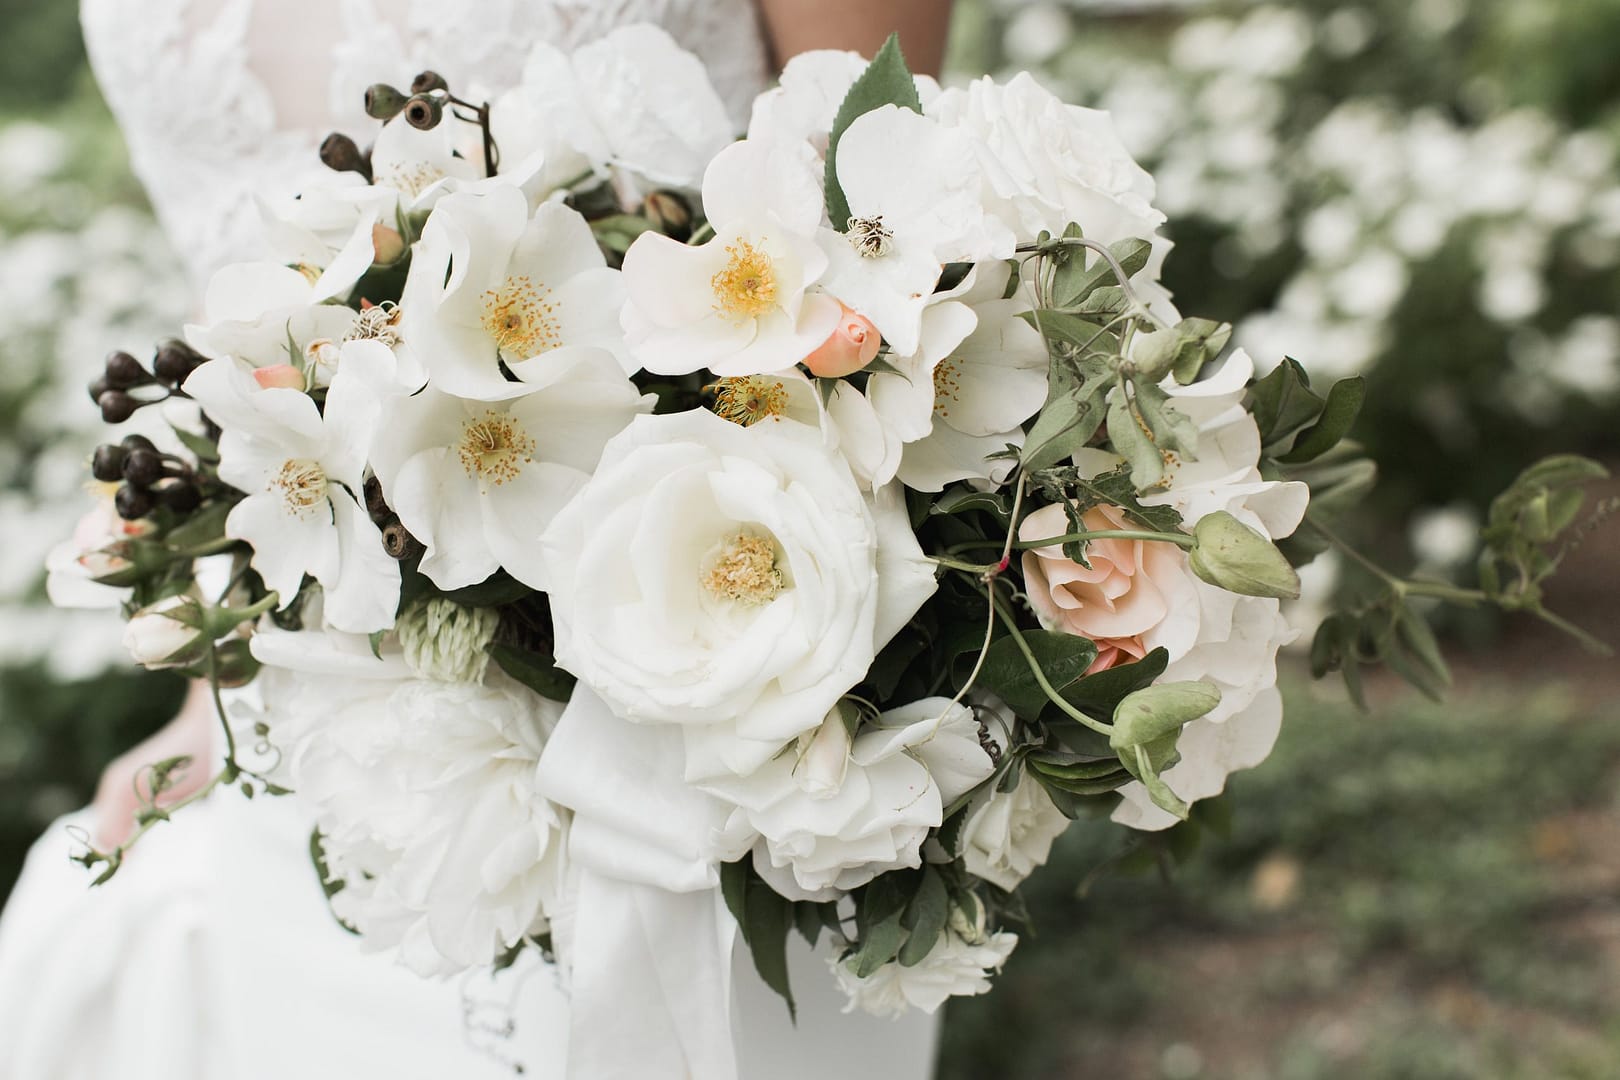 Spring green, peach and white bridal bouquet by Nectar and Root, Vermont wedding florist at Shelburne Museum in Shelburne, Vermont.